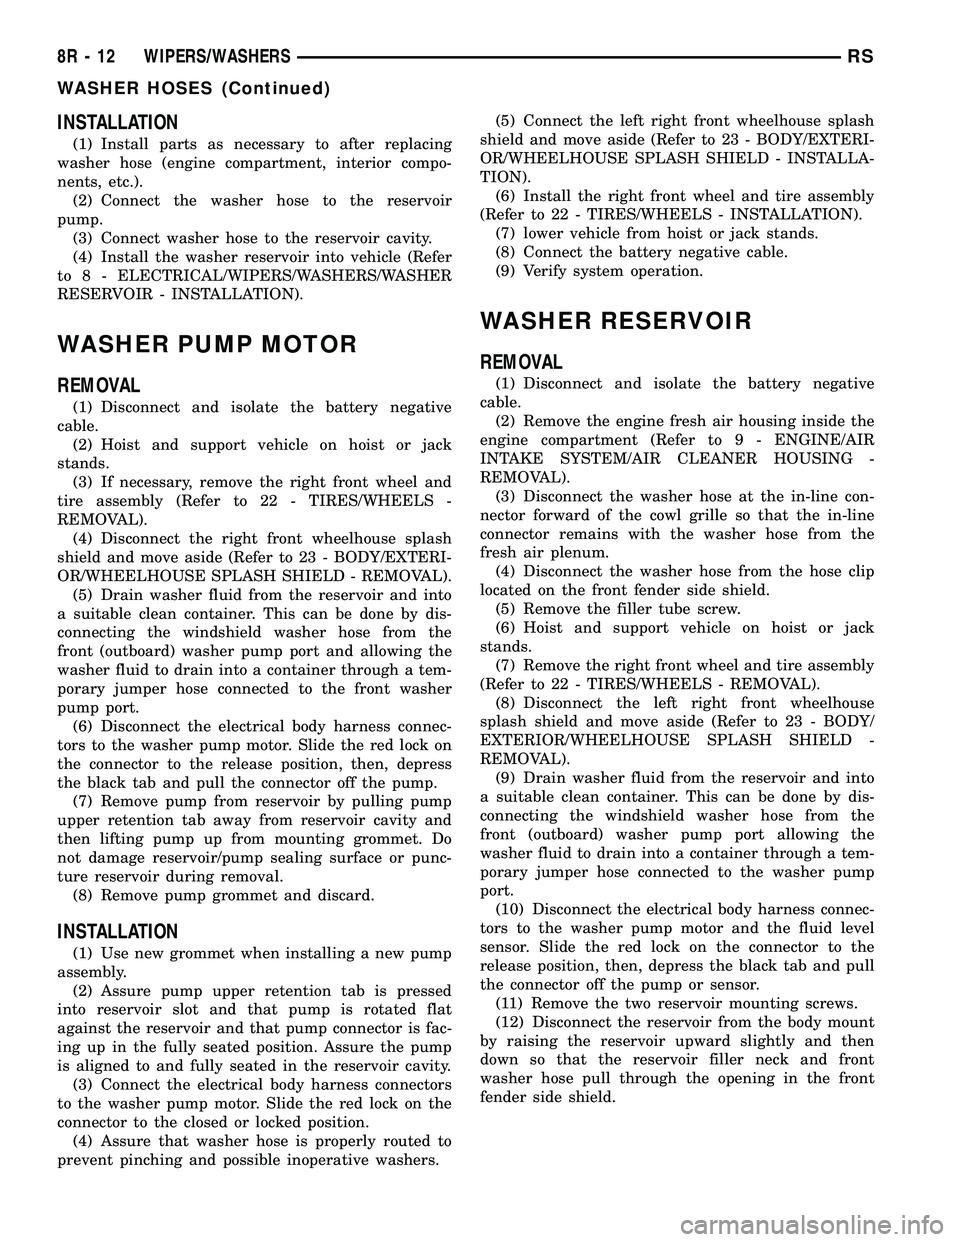 CHRYSLER CARAVAN 2005  Service Manual INSTALLATION
(1) Install parts as necessary to after replacing
washer hose (engine compartment, interior compo-
nents, etc.).
(2) Connect the washer hose to the reservoir
pump.
(3) Connect washer hose